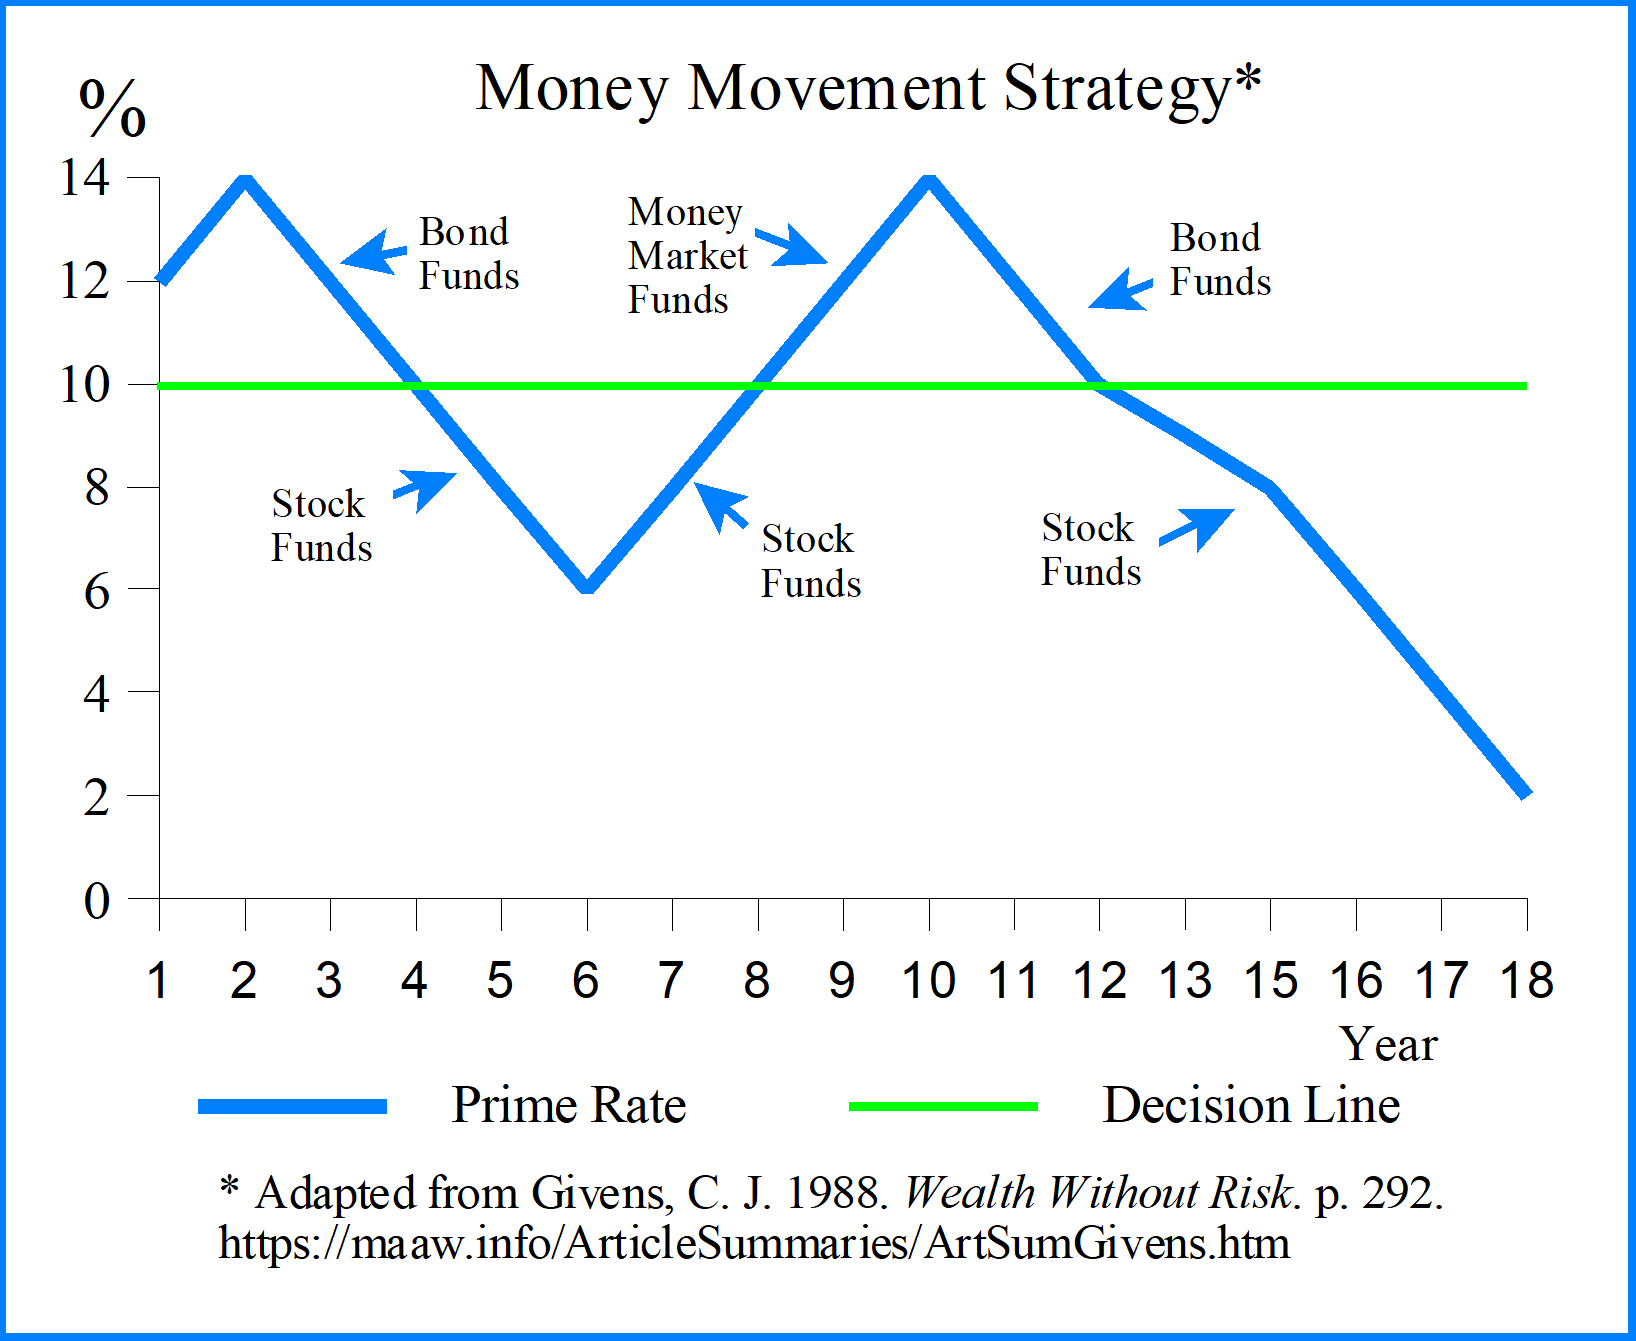 Given's Money Movement Strategy